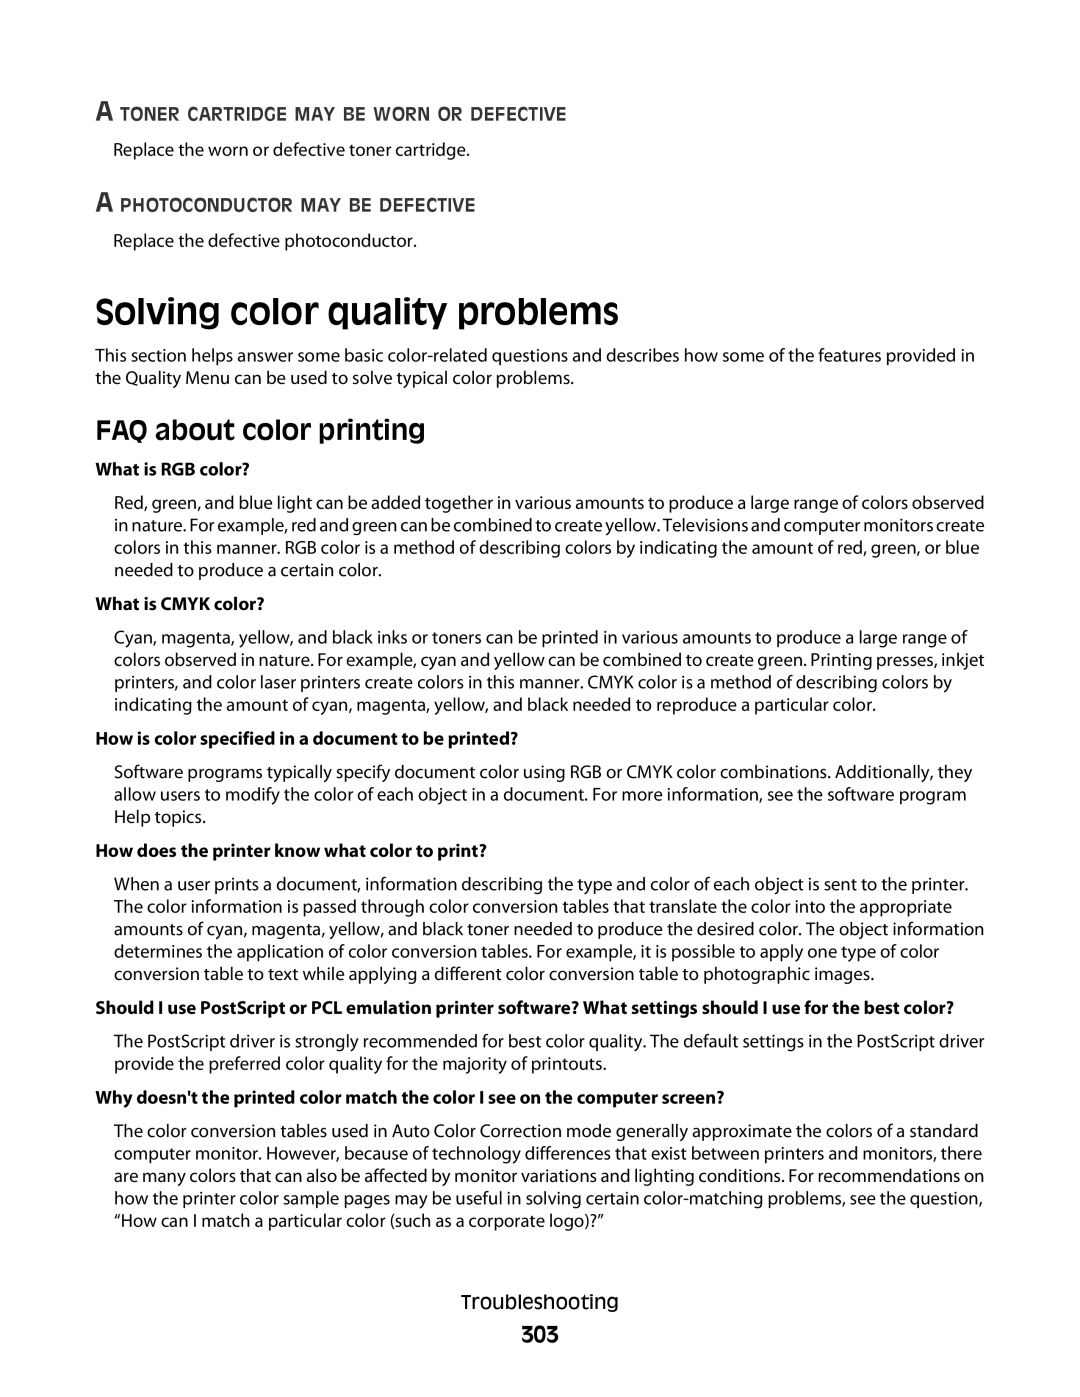 Lexmark MS00855, MS00859, MS00853, MS00850 Solving color quality problems, FAQ about color printing, 303, What is RGB color? 